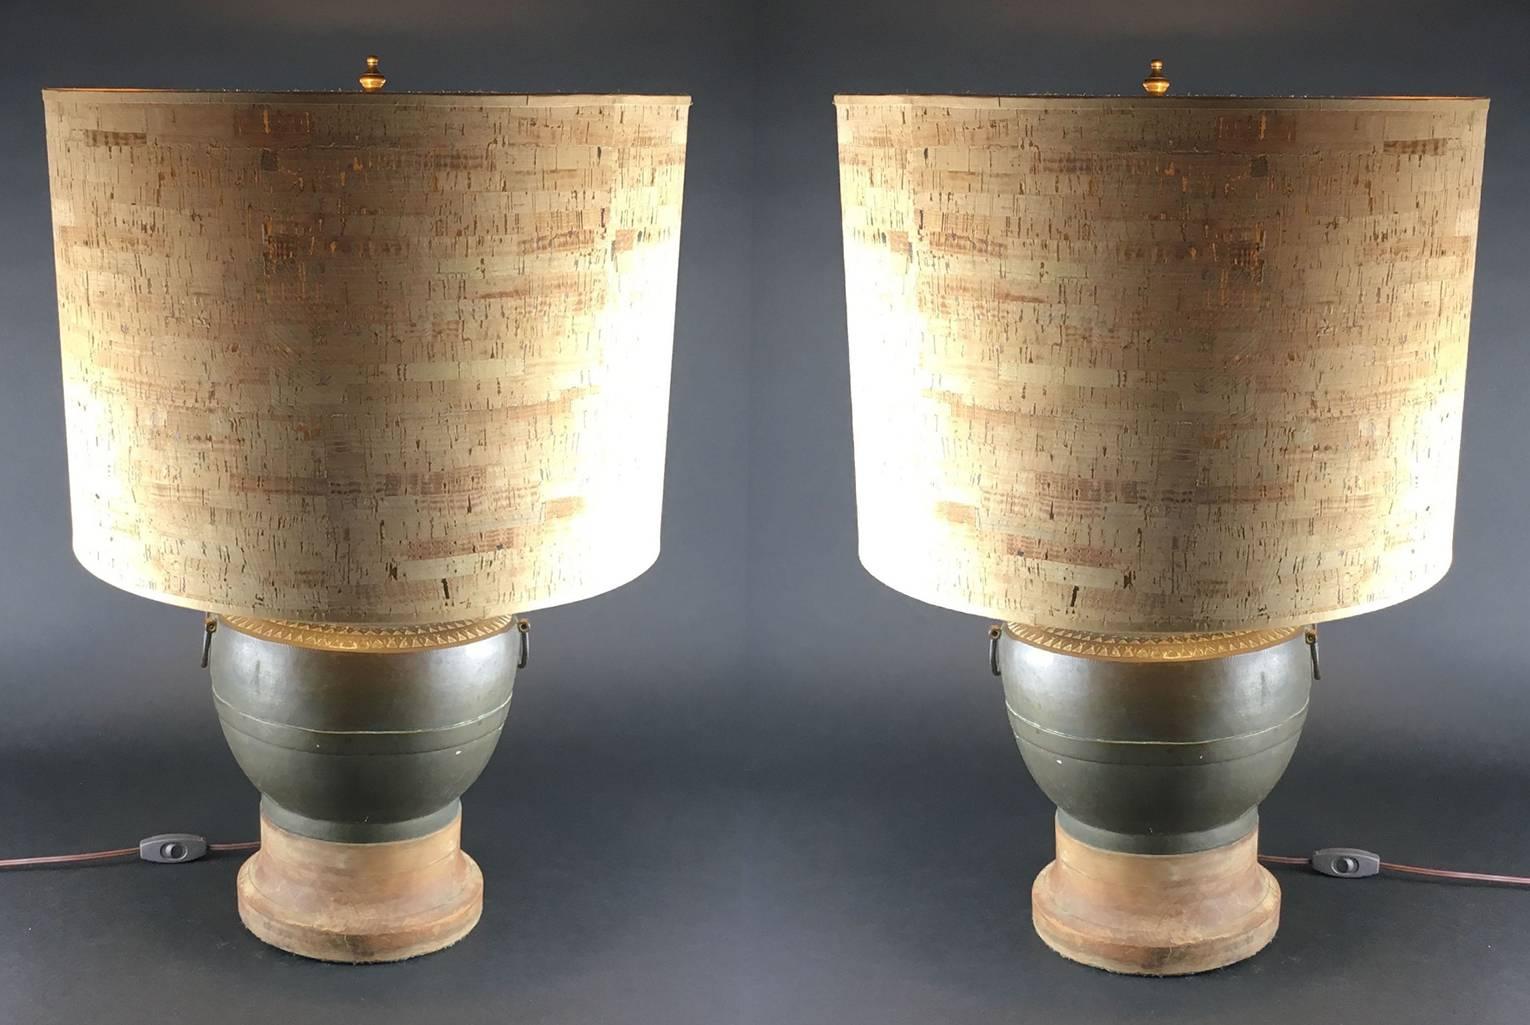 Pair of 1970s metal urn form table lamps with original cork shades, the baluster-form bodies cast with horizontal geometric bands to the shoulders, with rings to the sides. Fitted onto hard-wood bases.

Unmarked. 
Measures: 25